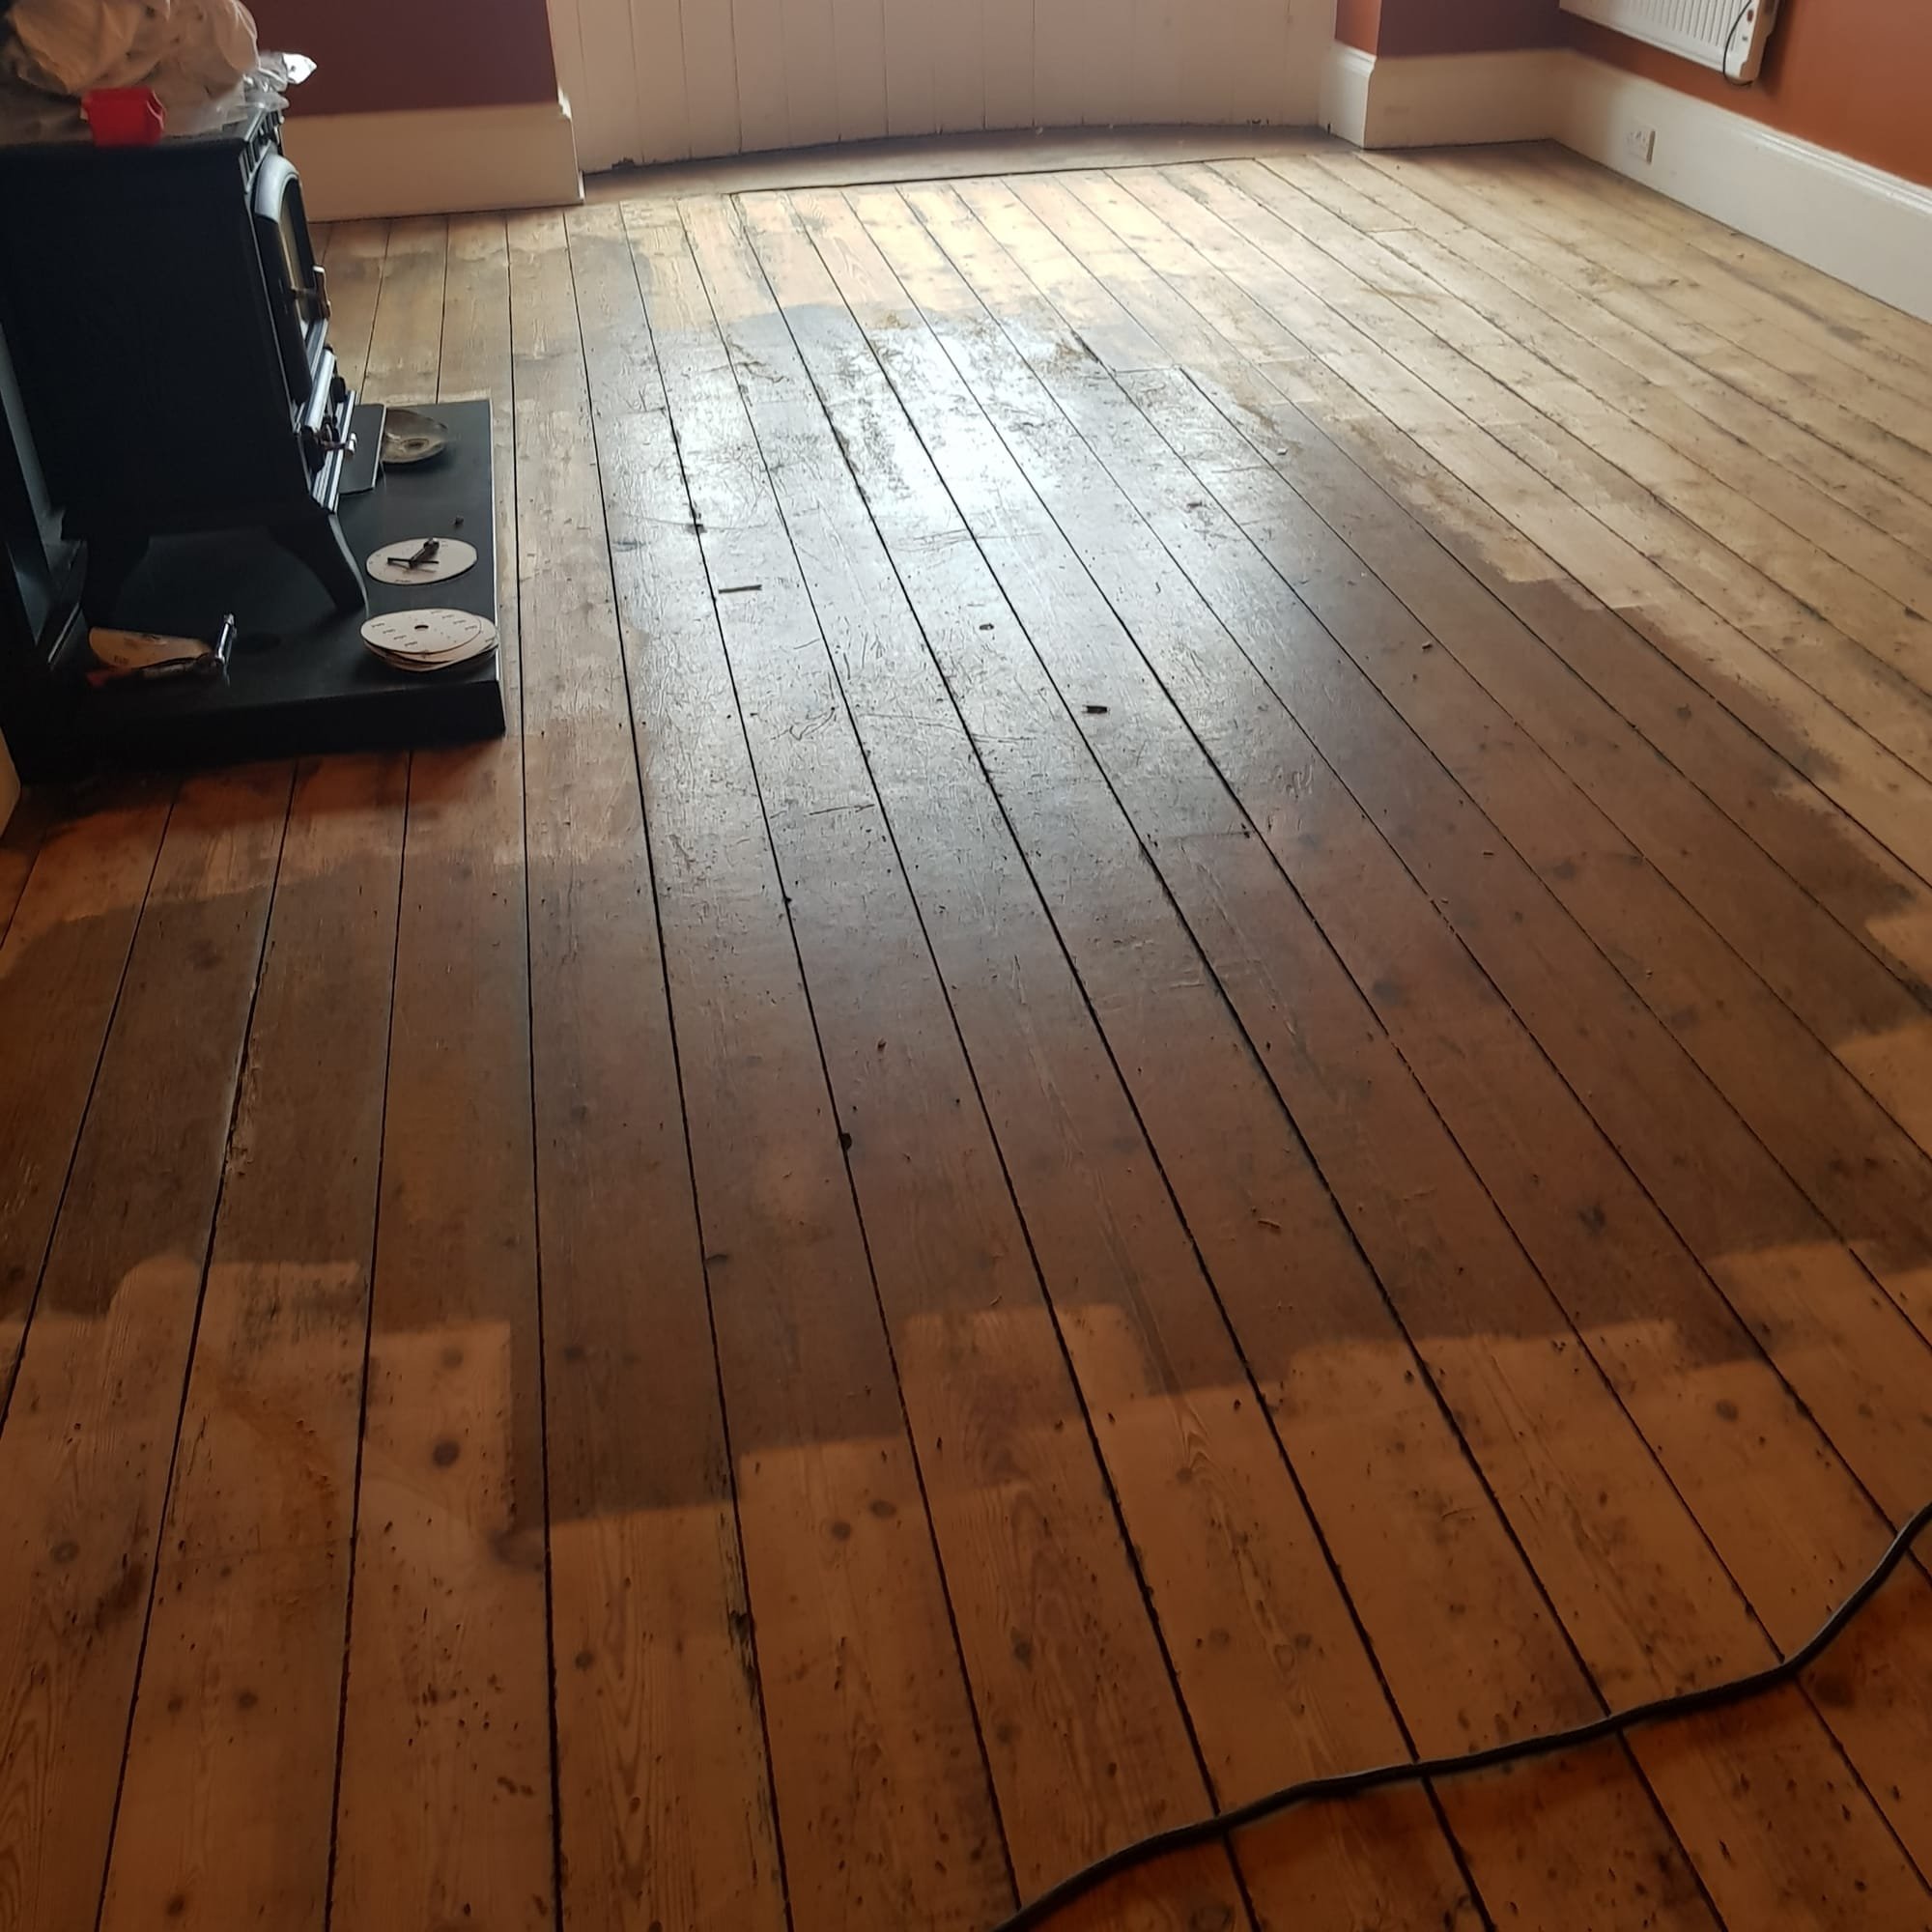 Restaurant painted and floor sanded and re varnished Jan. 2019